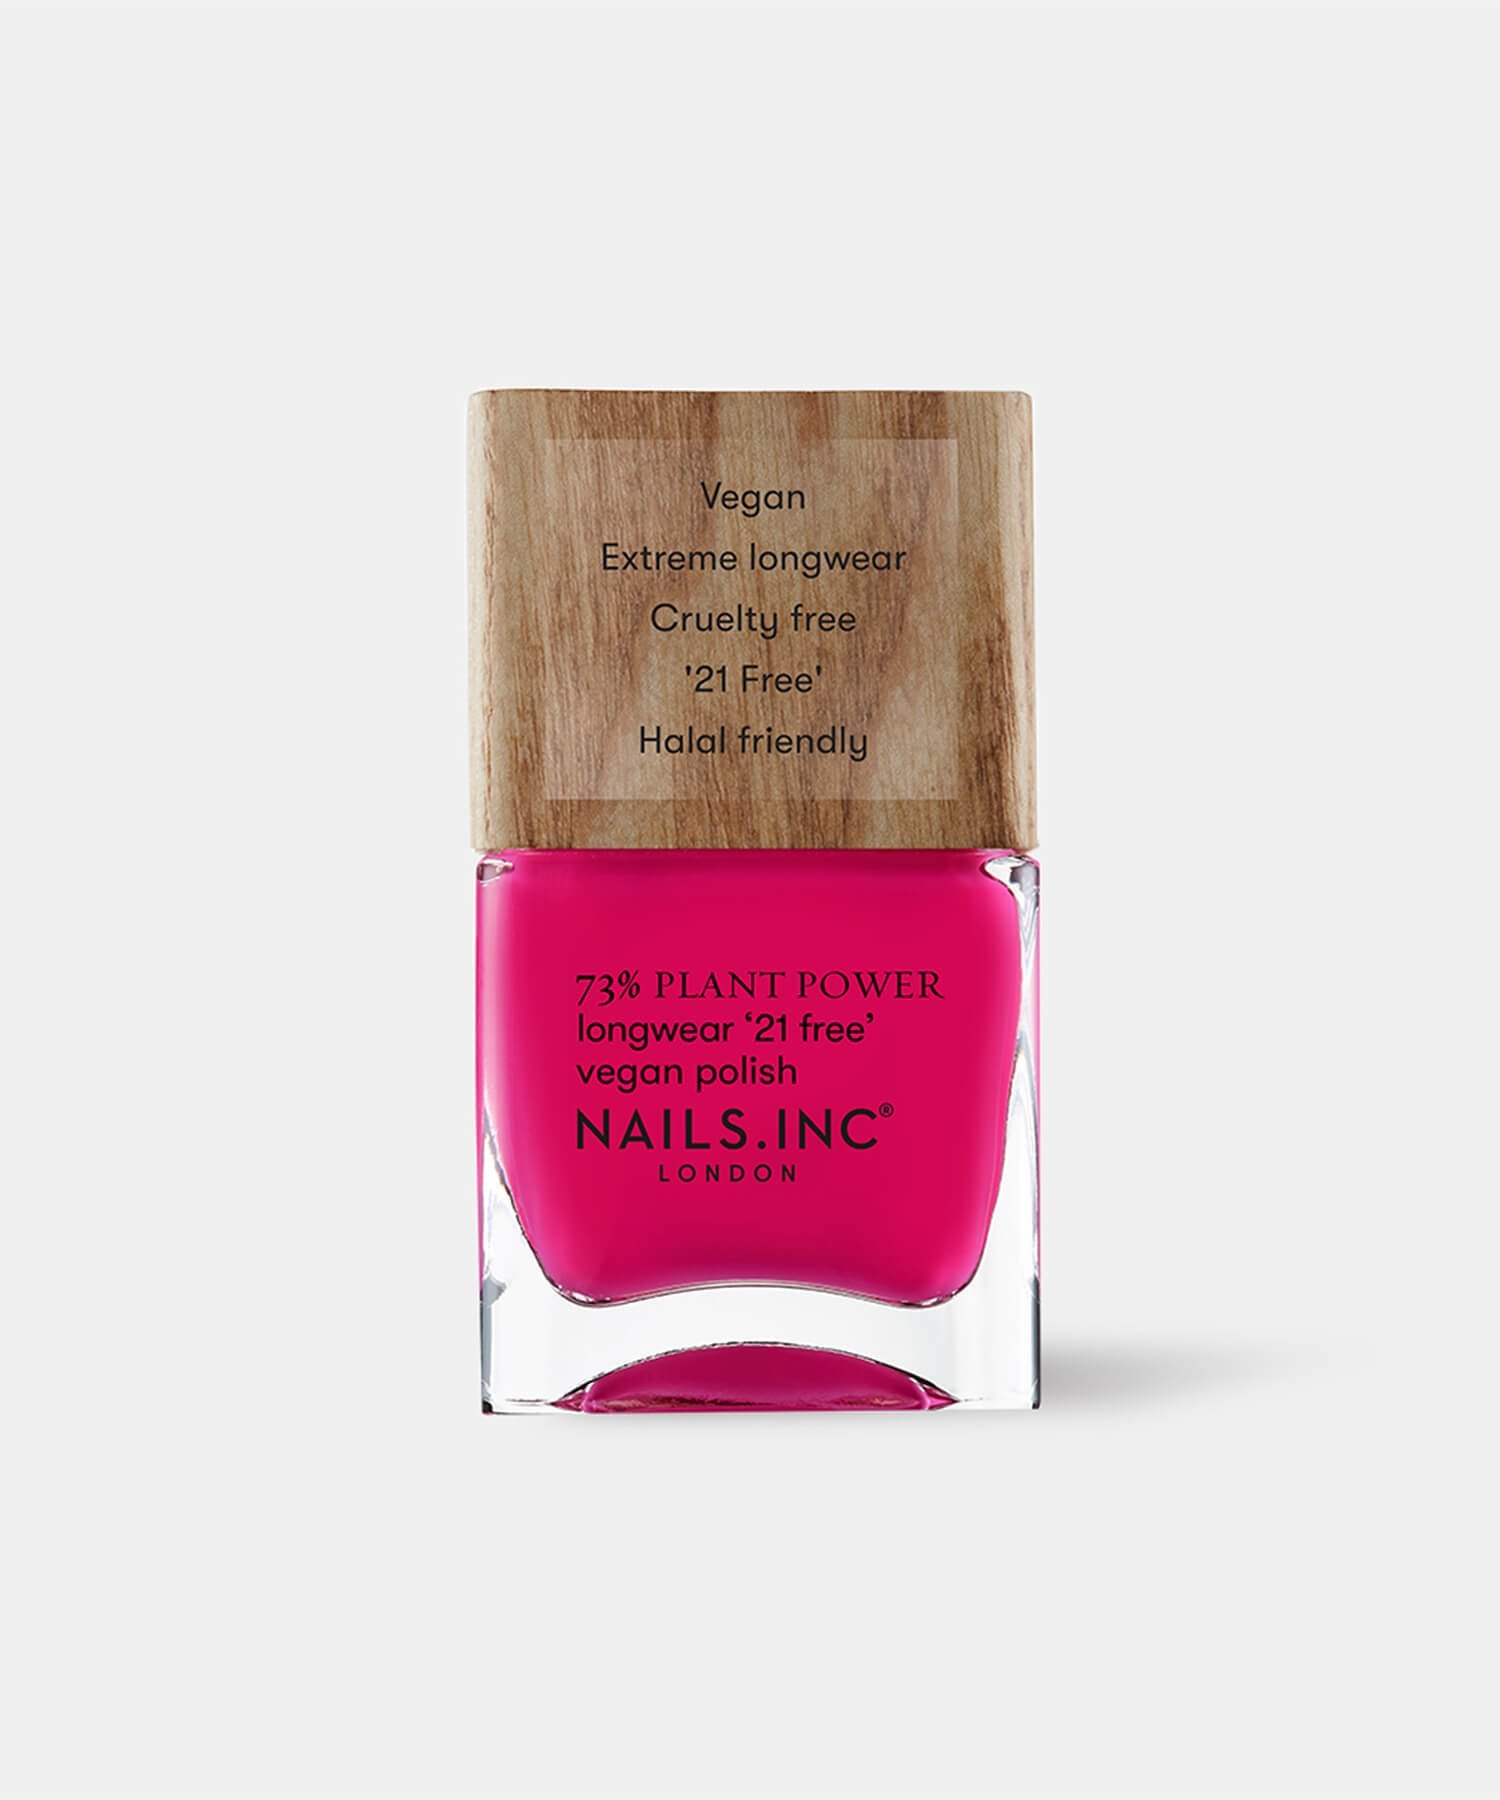 NAILS INC PLANT Mindfulness Mantra lCY CN lC }jLAElC|bV